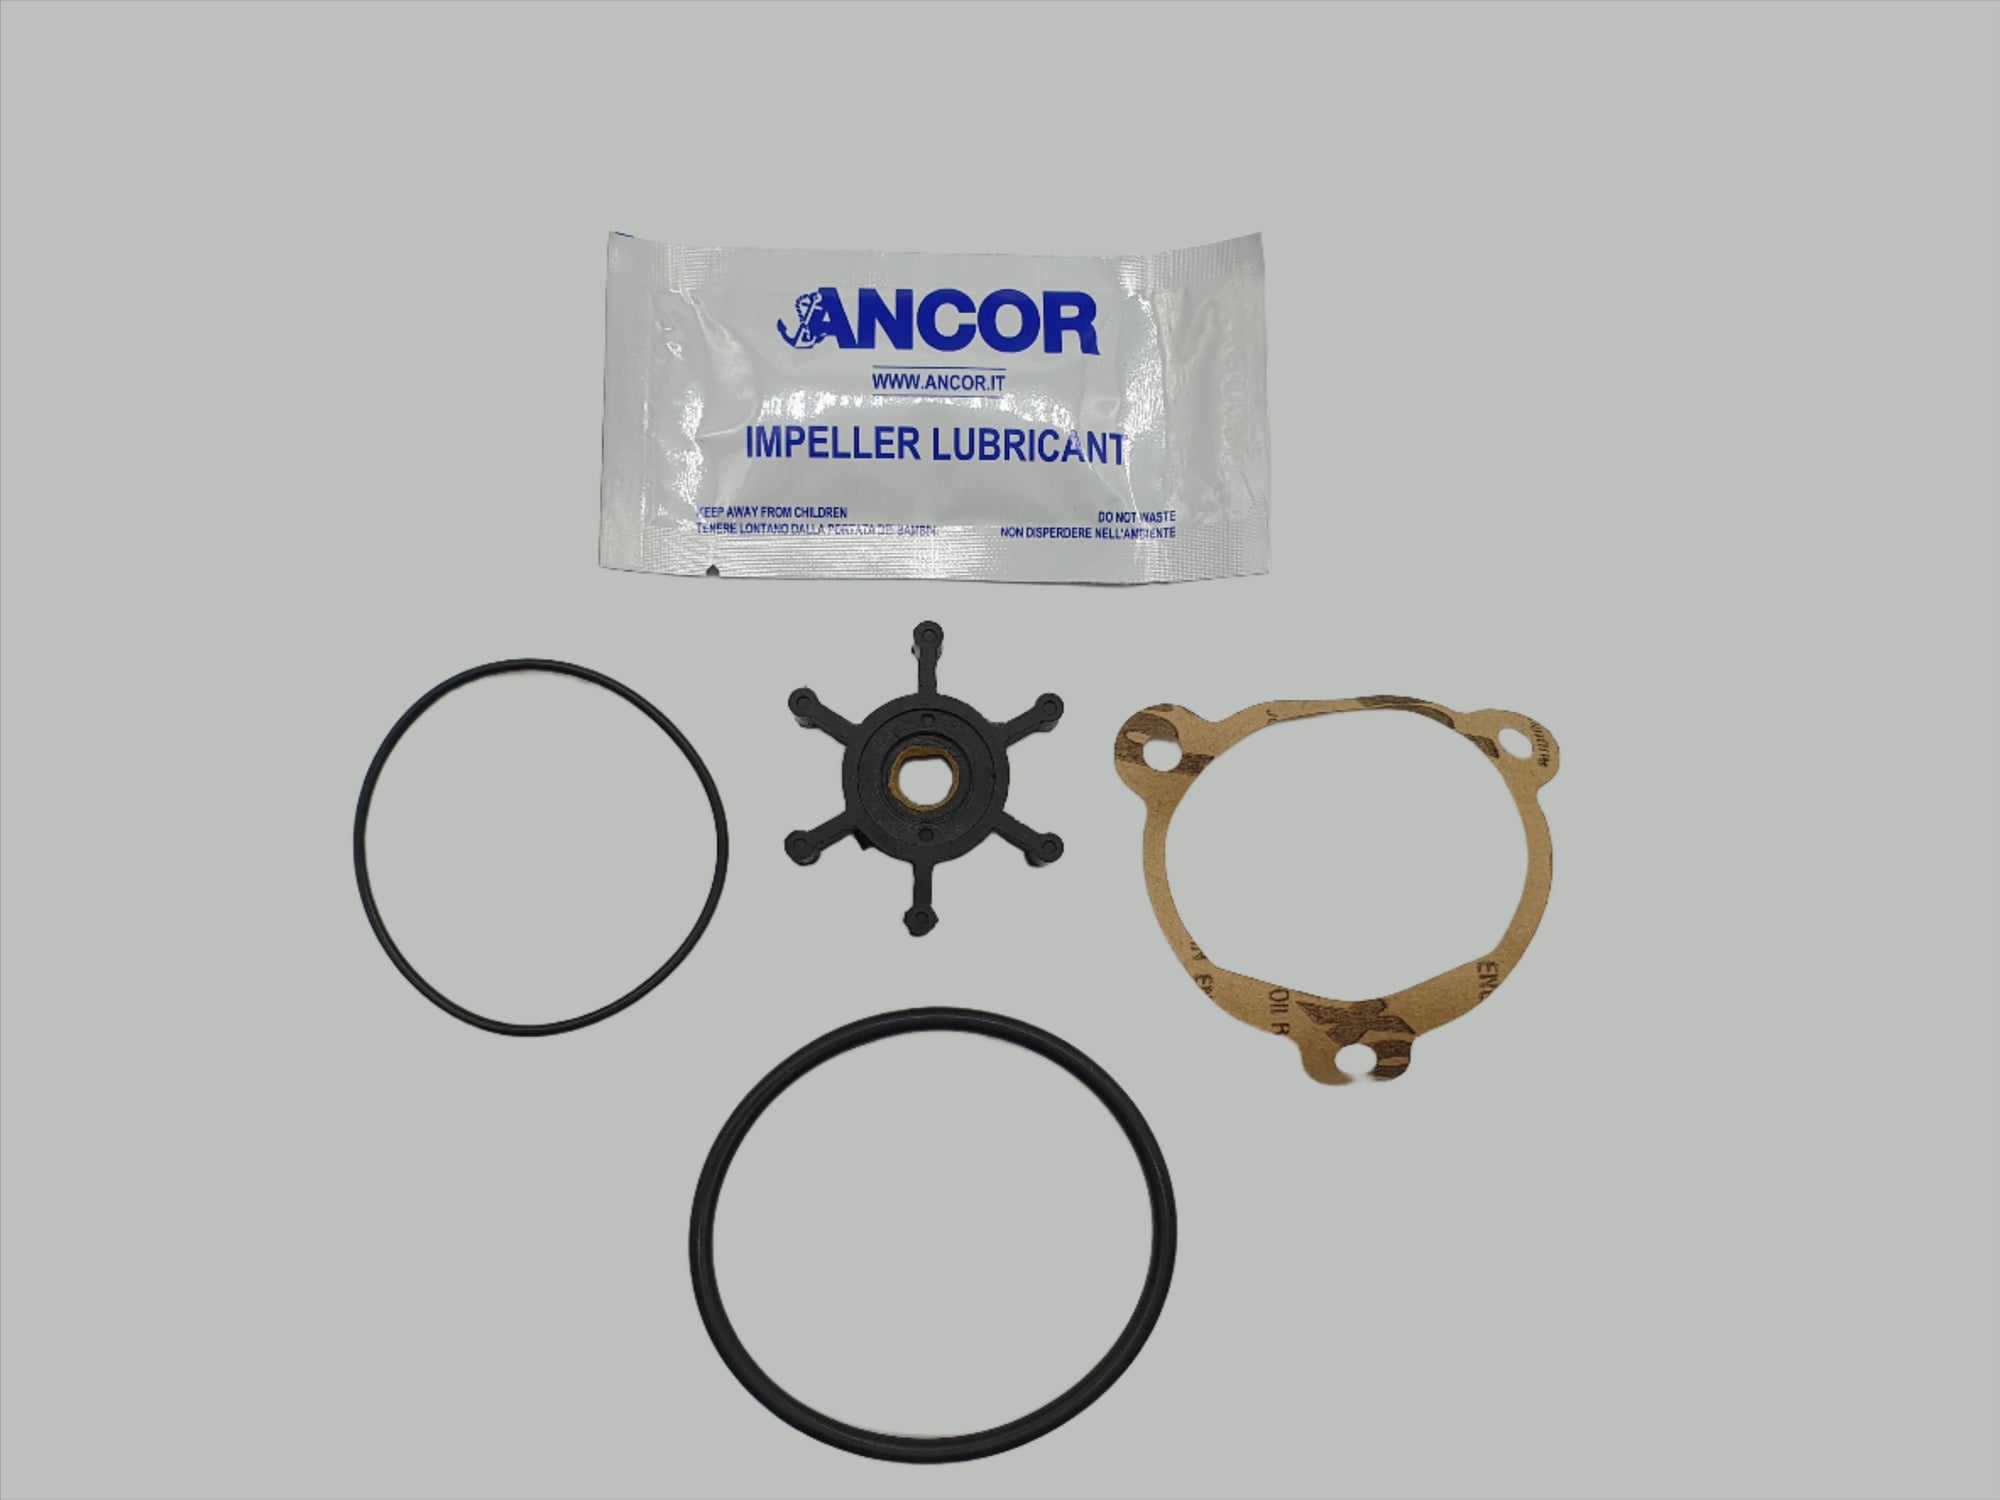 AN 2079 Replaces Johnson Impeller 09-1052-S9